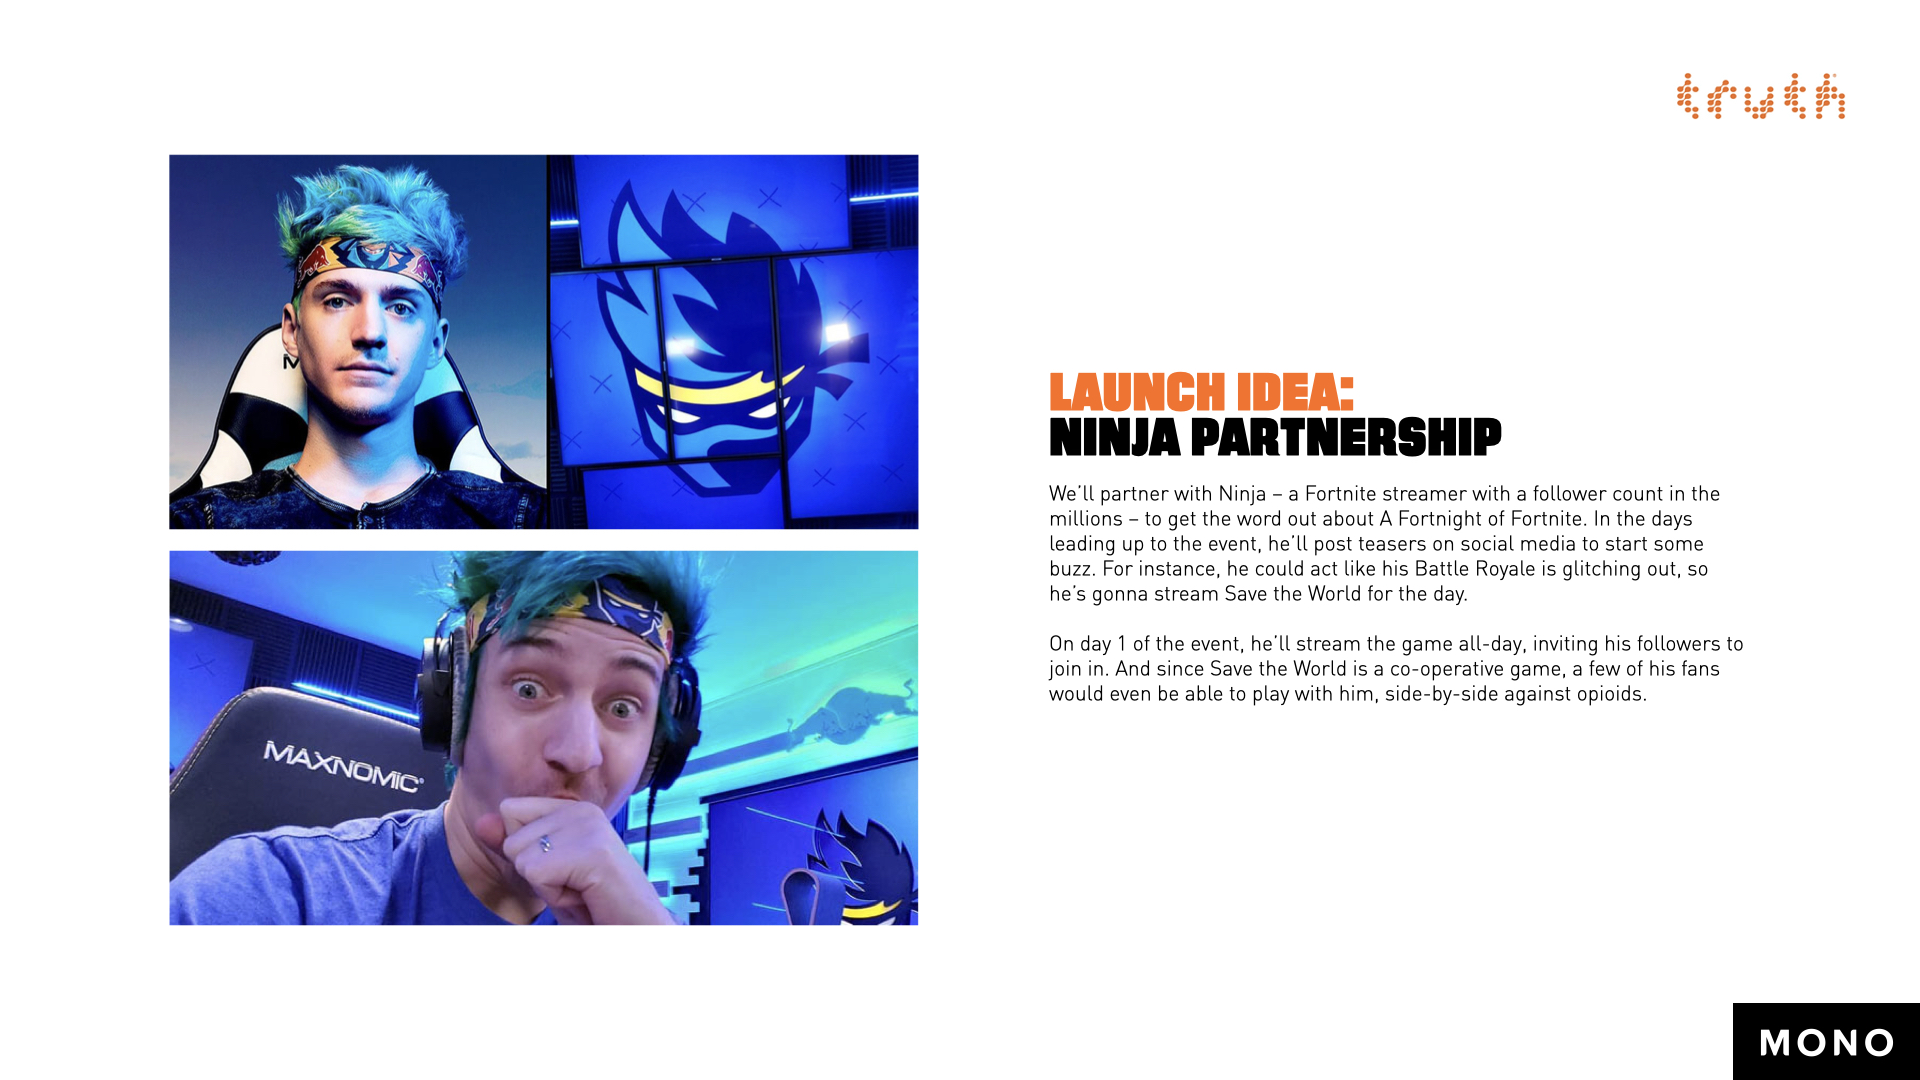 Launch Idea: Ninja Partnership. We’ll partner with Ninja – a Fortnite streamer with a follower count in the millions – to get the word out about A Fortnight of Fortnite. In the days leading up to the event, he’ll post teasers on social media to start some buzz. For instance, he could act like his Battle Royale is glitching out, so he’s gonna stream Save the World for the day. On day 1 of the event, he’ll stream the game all-day, inviting his followers to join in. And since Save the World is a co-operative game, a few of his fans would even be able to play with him, side-by-side against opioids.